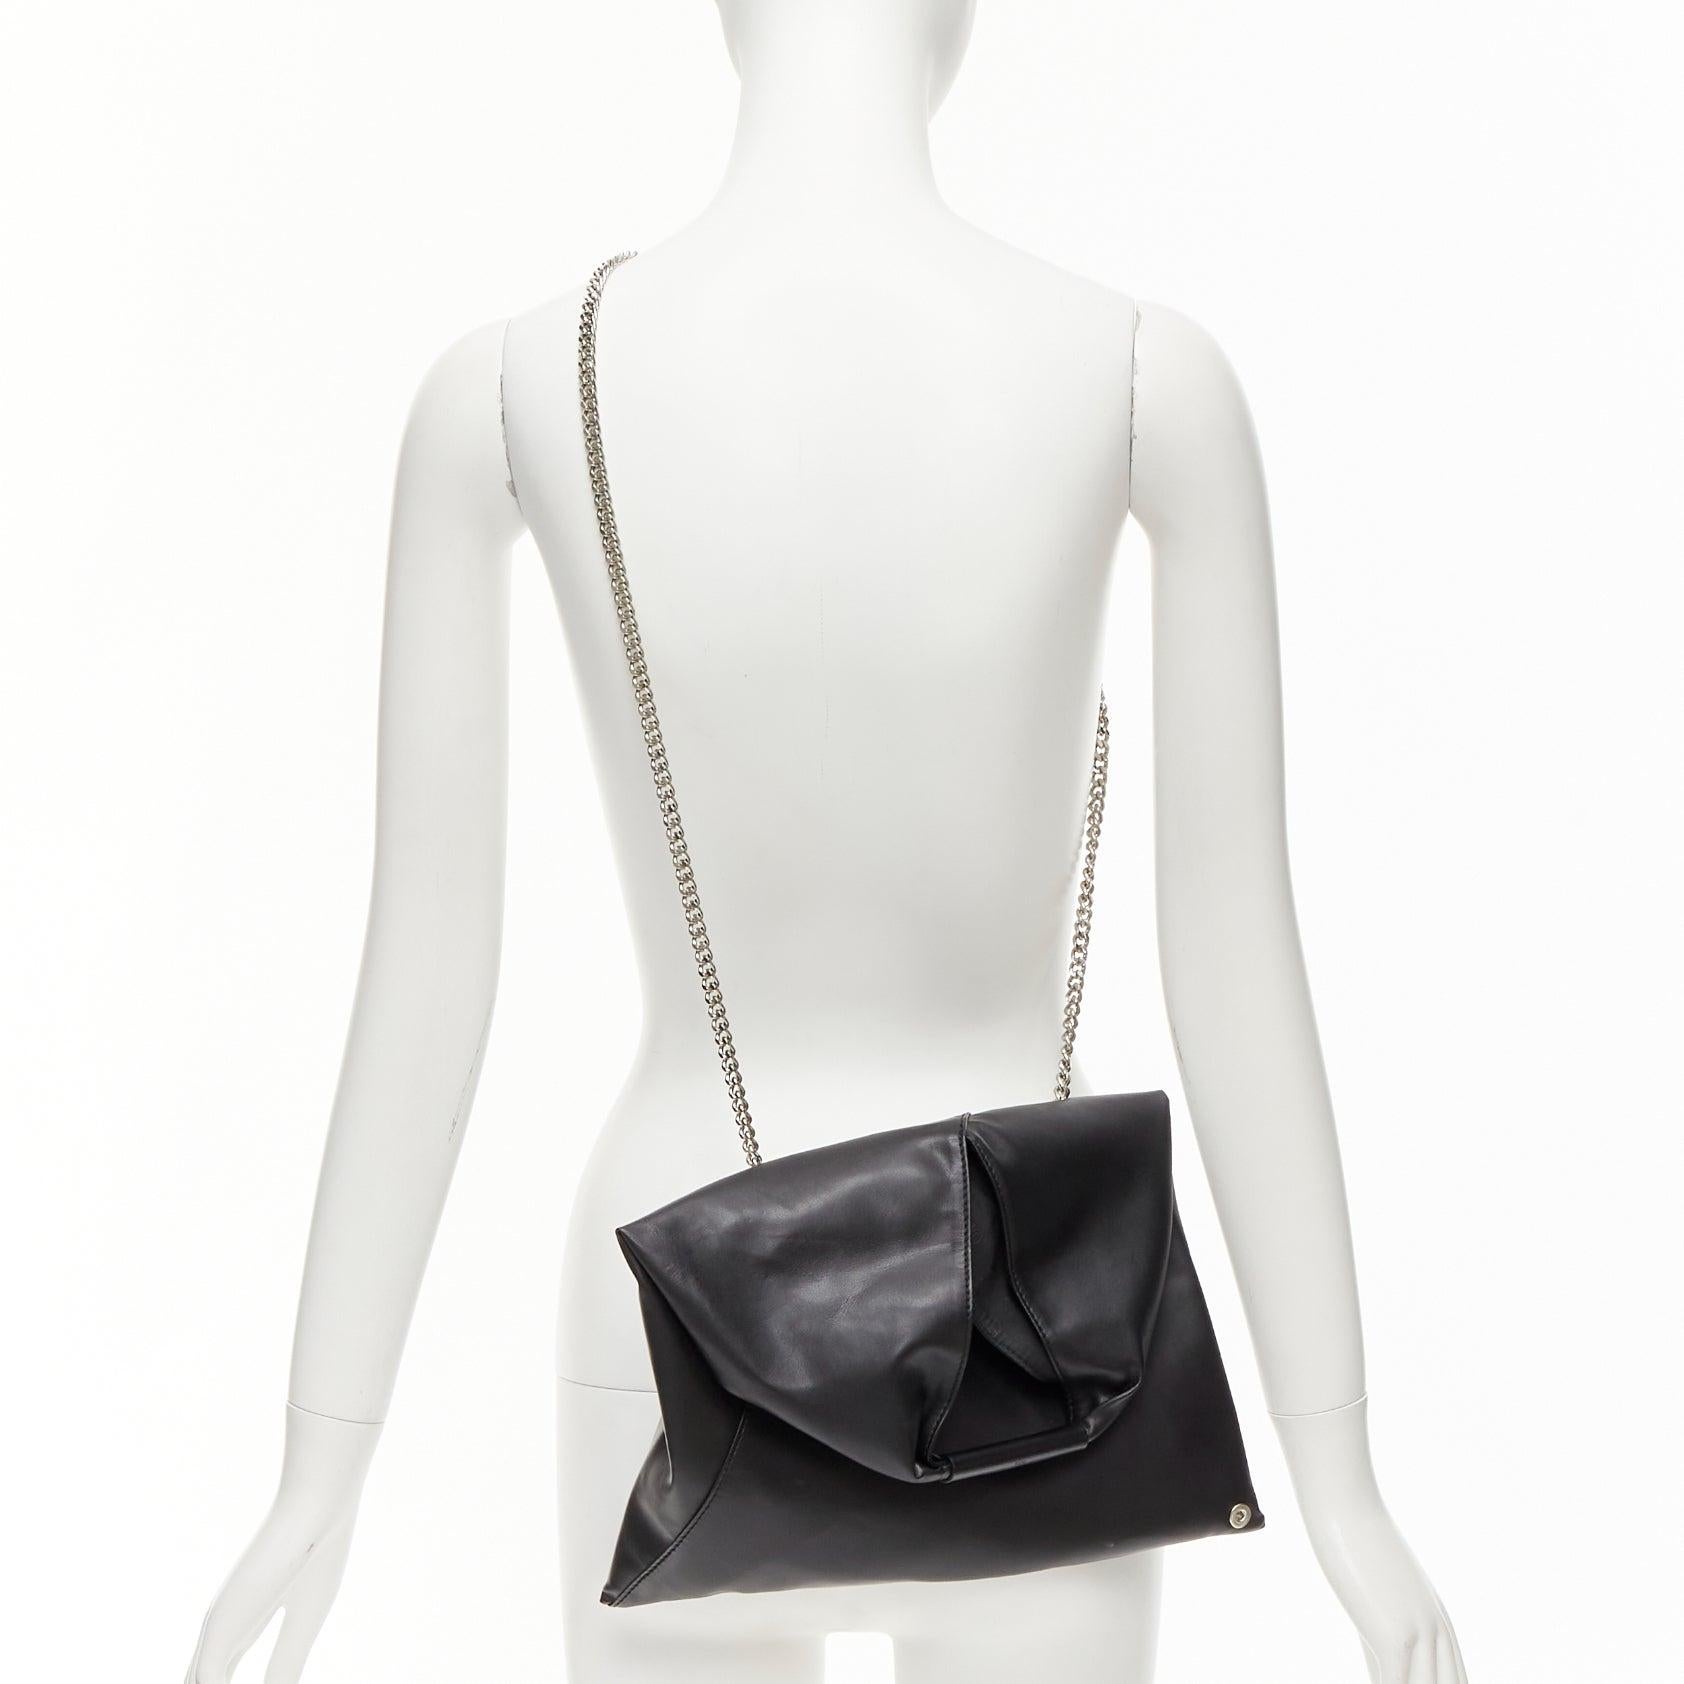 MAISON MARGIELA MM6 black buffed faux leather small triangle chain tote bag
Reference: NKLL/A00241
Brand: Maison Margiela
Model: Small Triangle
Collection: MM6
Material: Leather, Metal
Color: Black, Silver
Pattern: Solid
Lining: Black Fabric
Extra